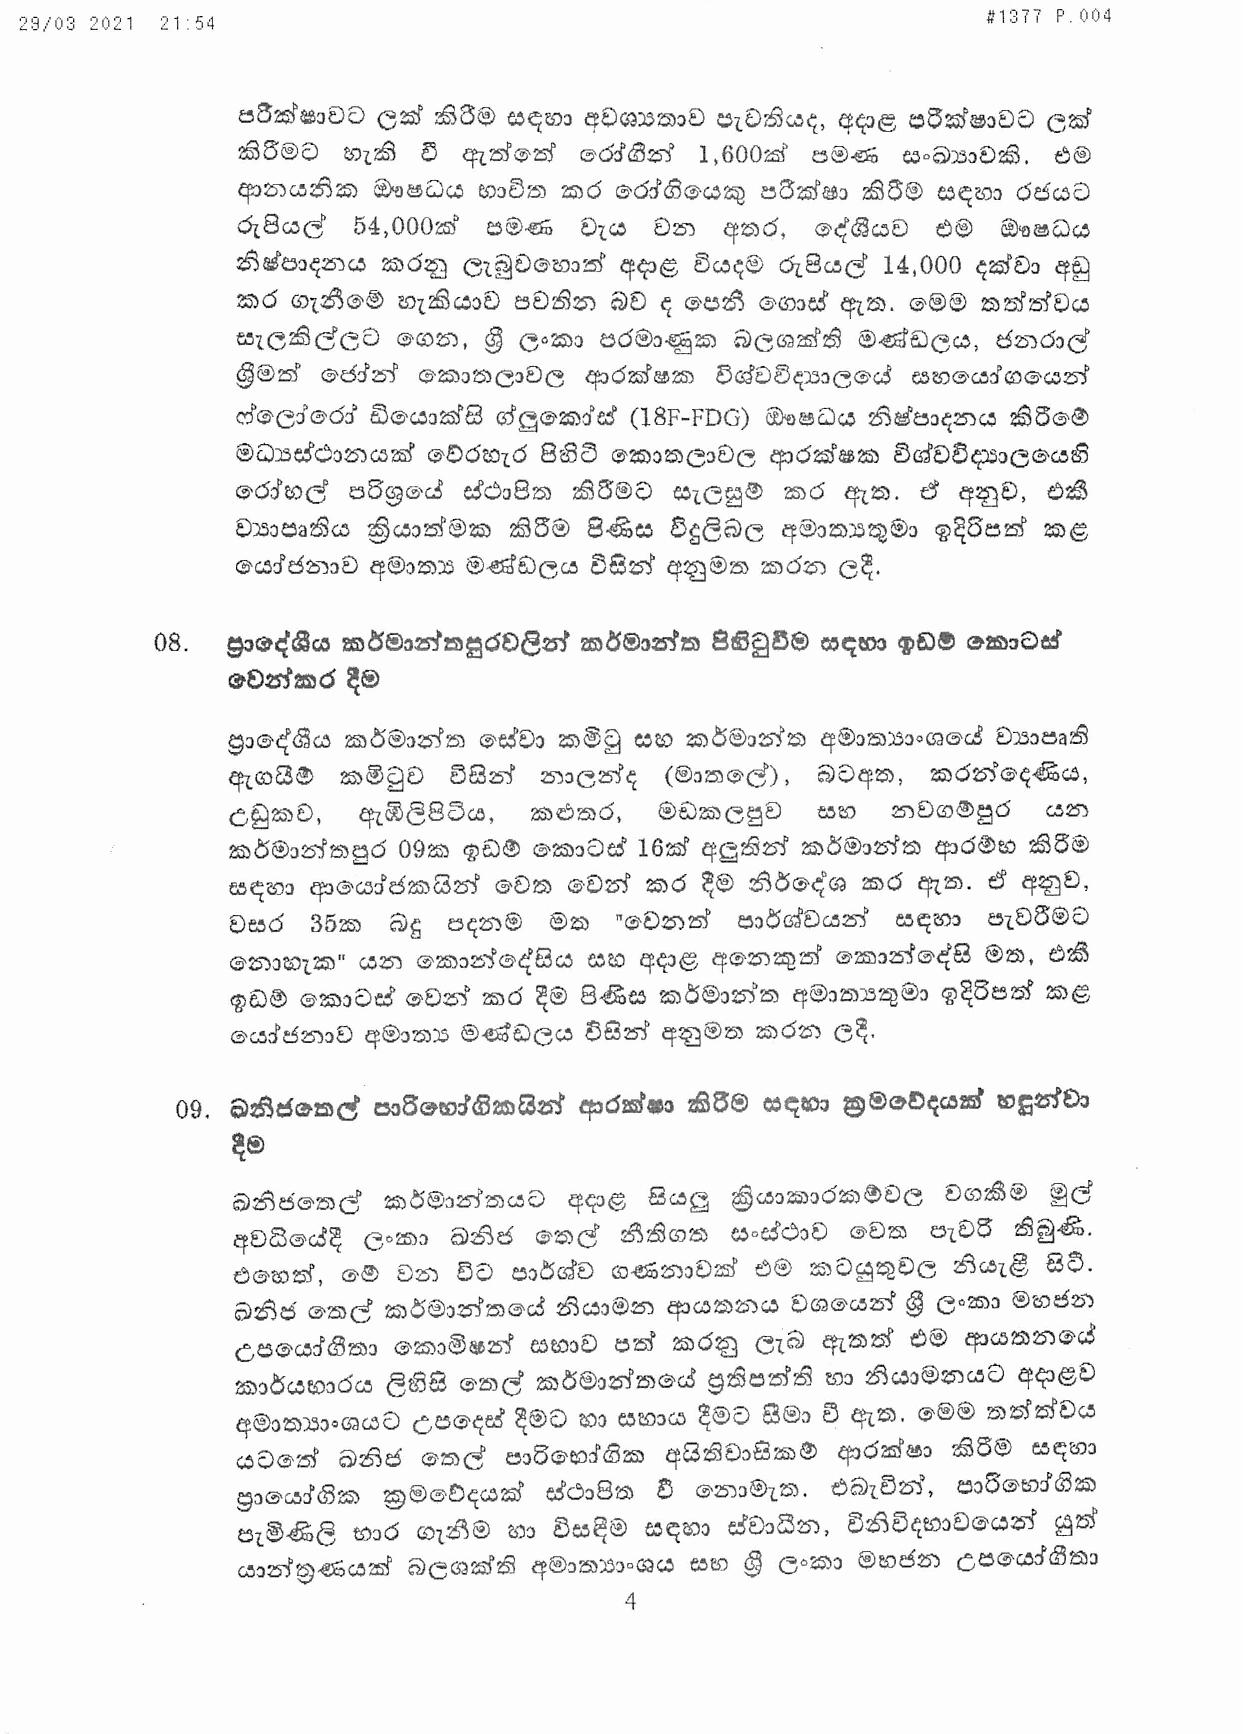 Cabinet Decision on 29.03.2021 1 page 004